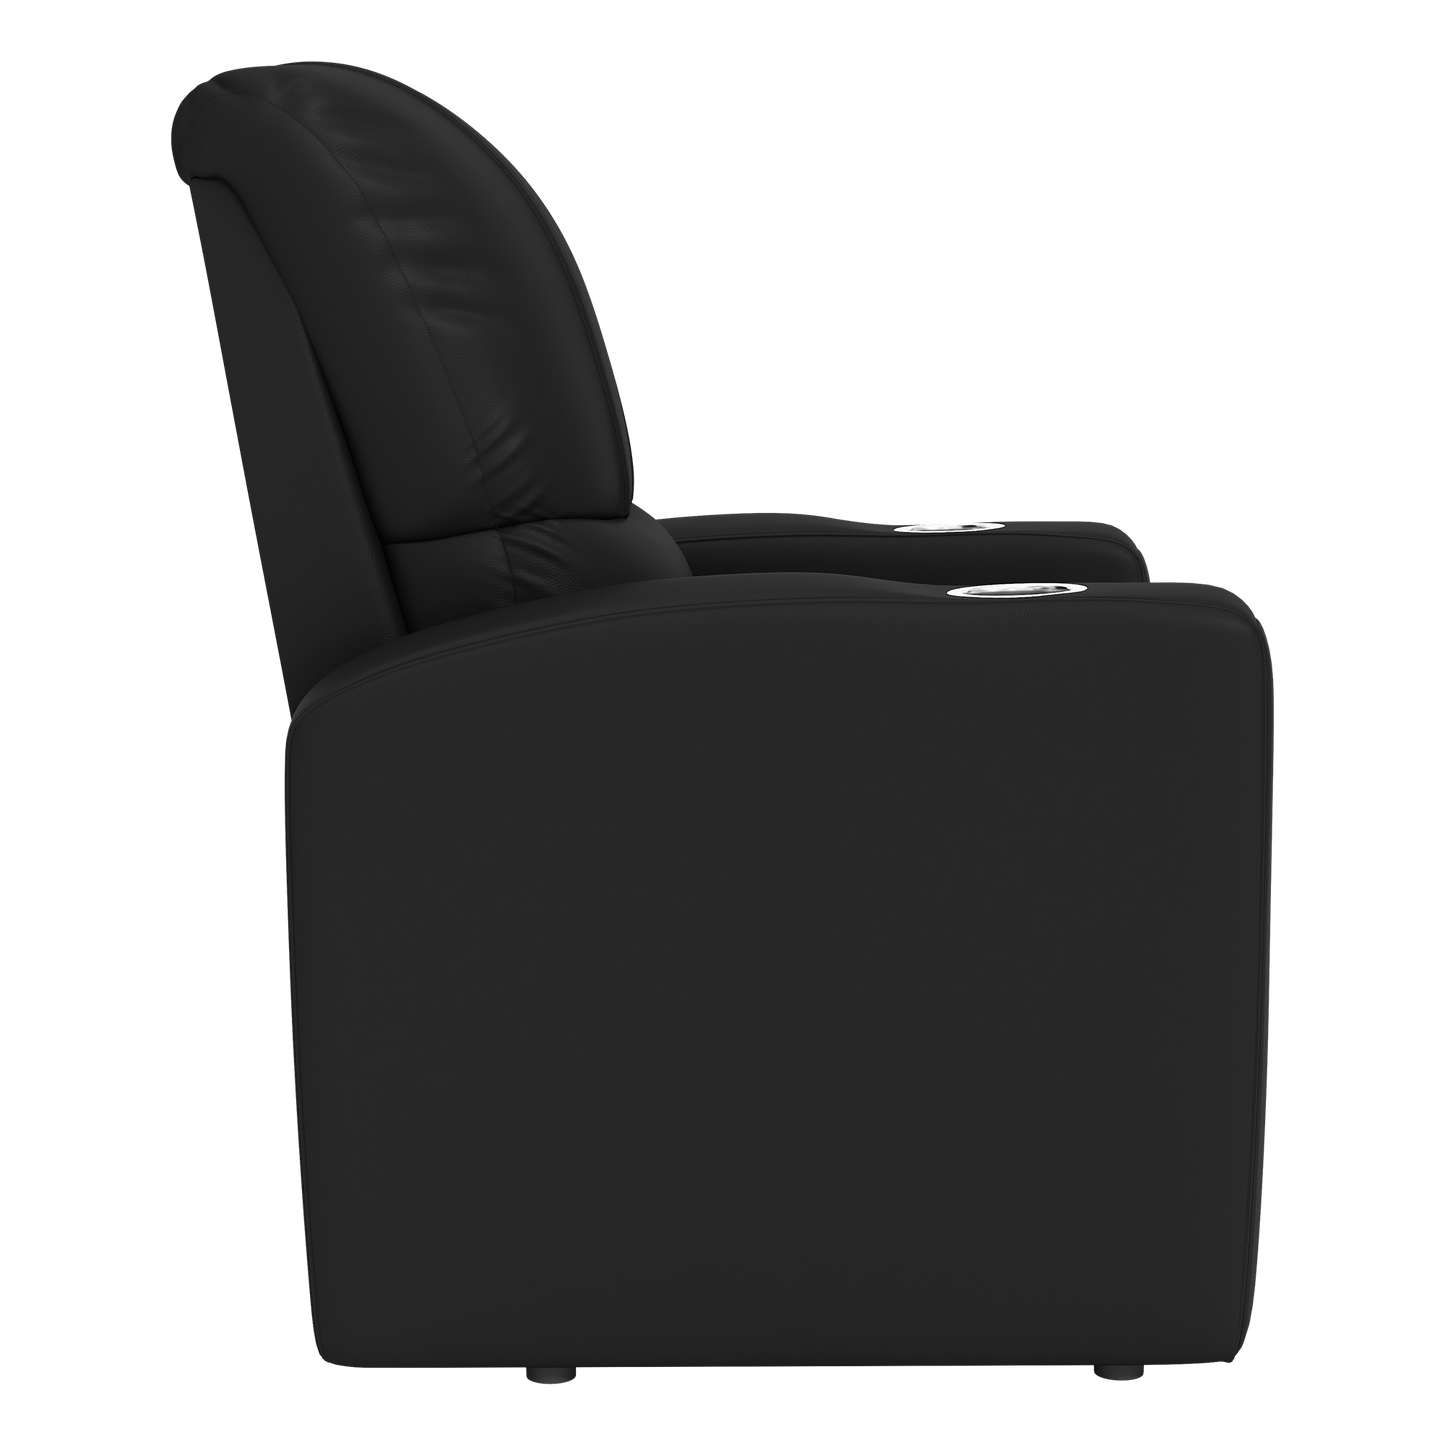 Stealth Recliner with Boston Red Sox Cooperstown Secondary